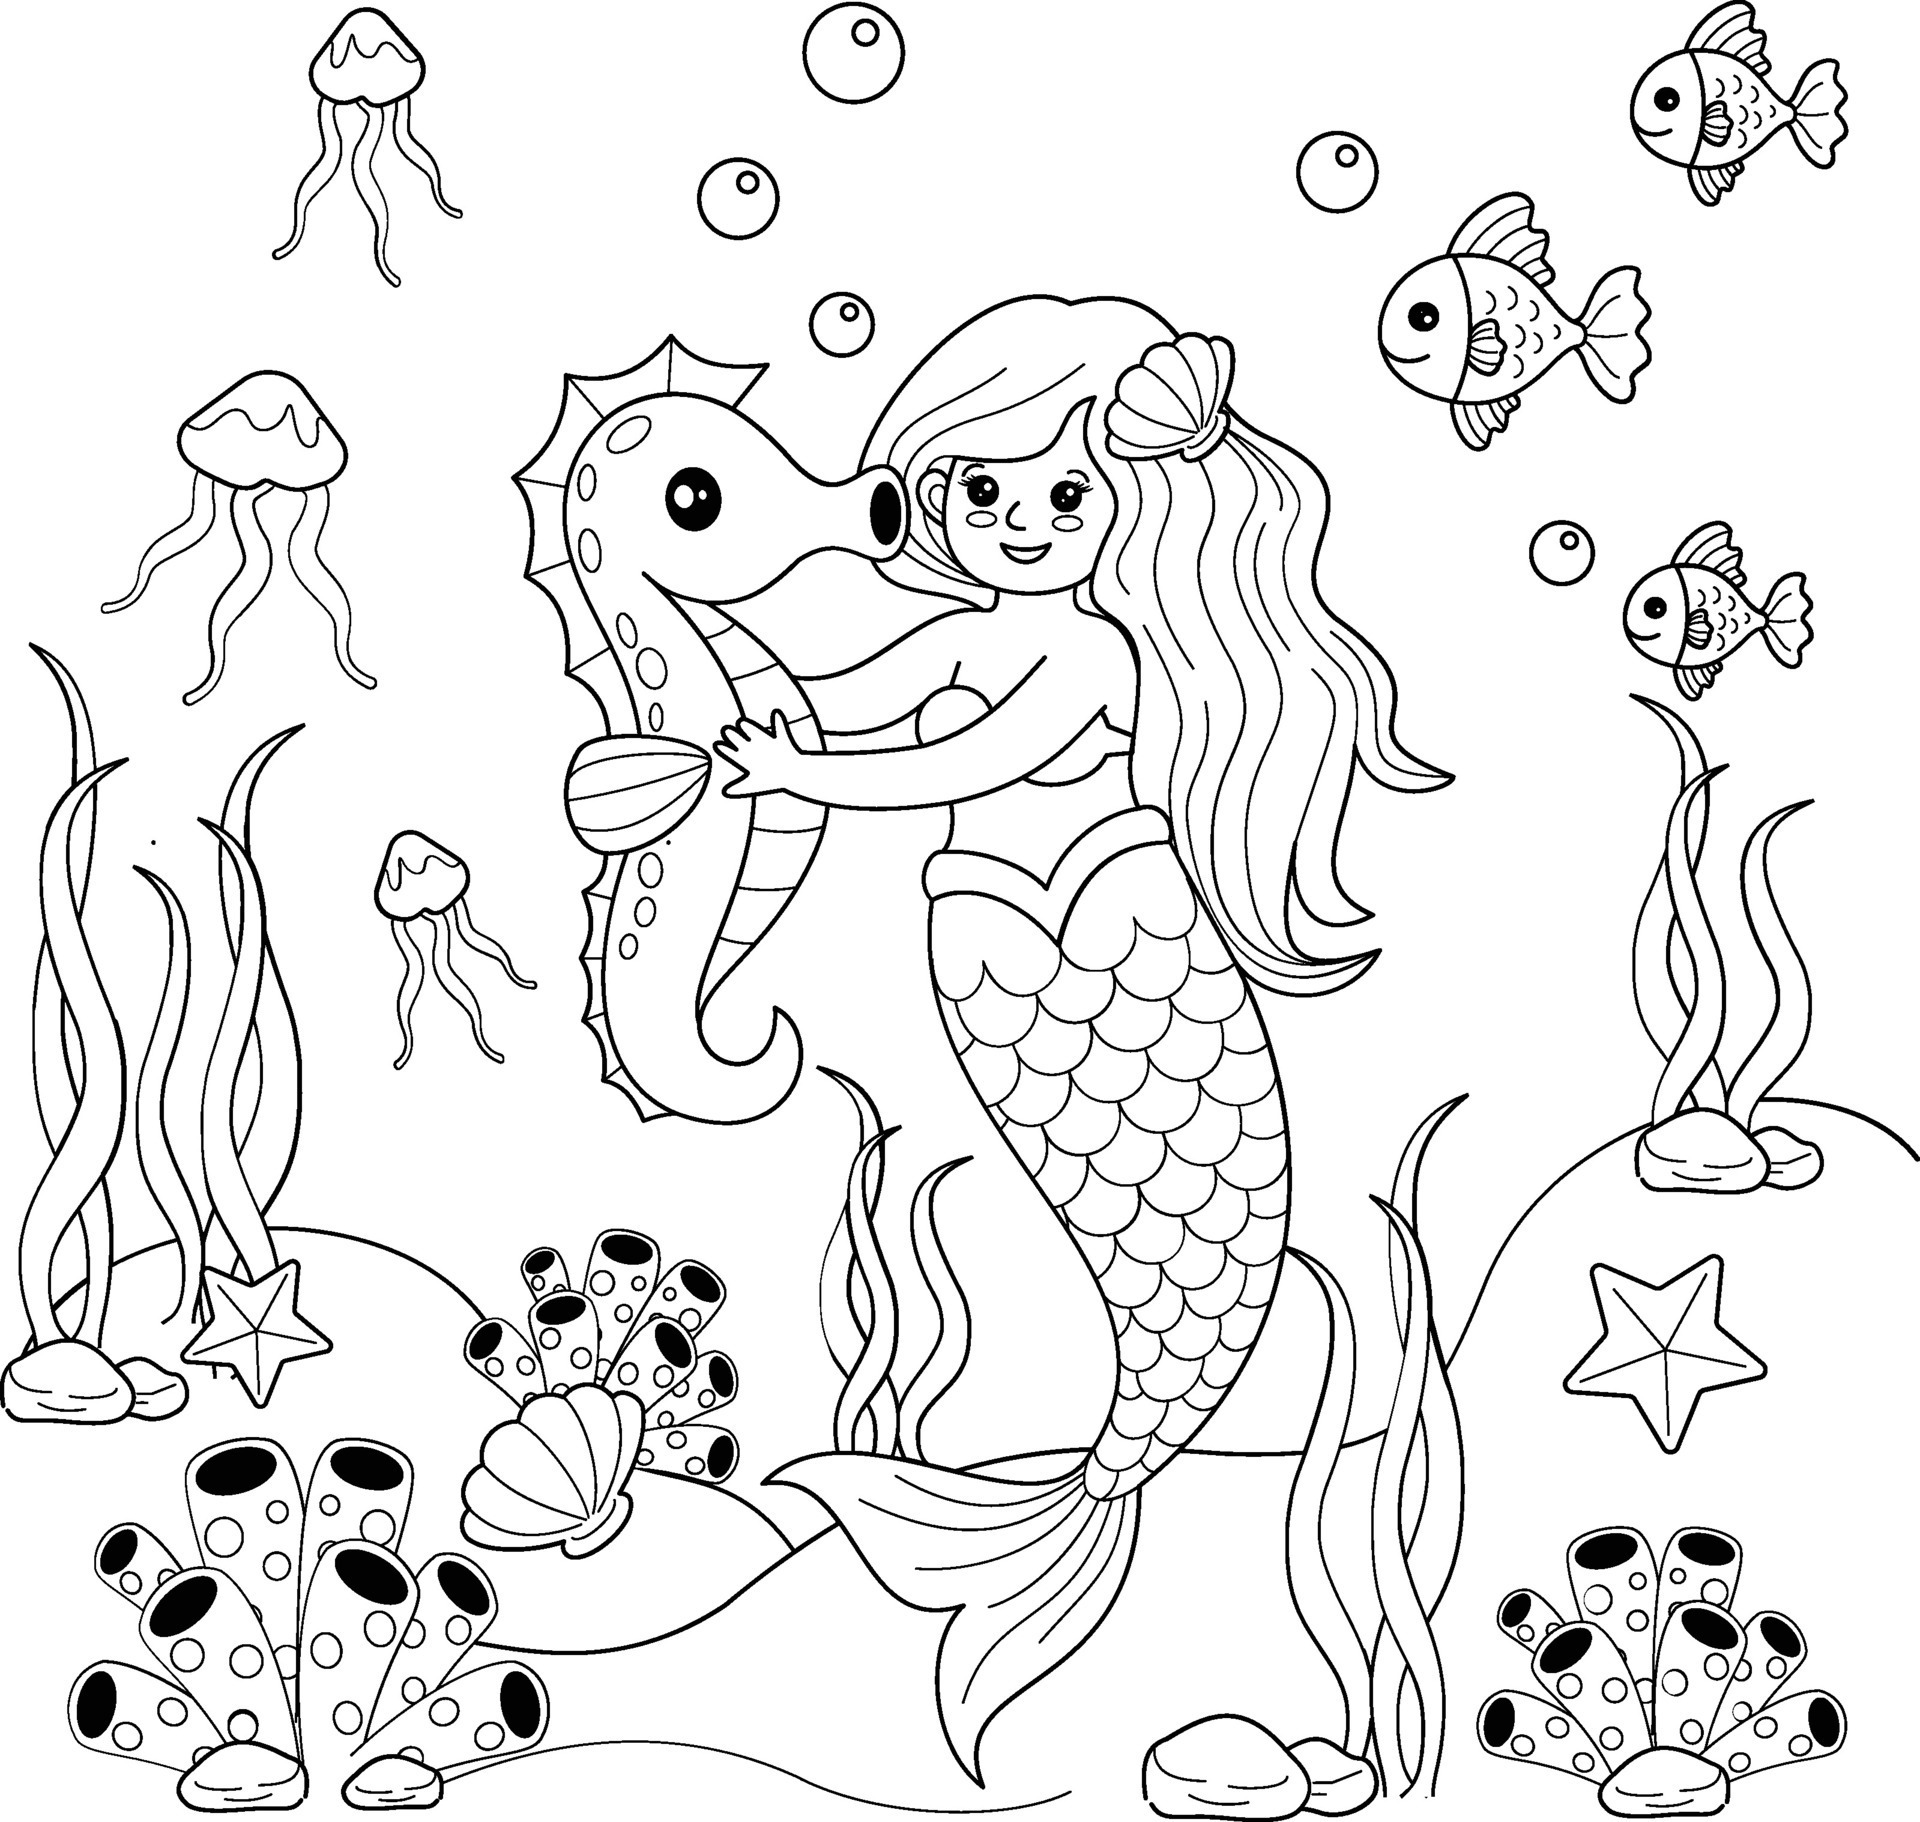 Mermaid Coloring Book Volume 1: Mermaids with Under the Sea Landscape and  Animals for Kids, 8.5 x 11”, Soft Cover, 50 Detailed Coloring Pages. Every